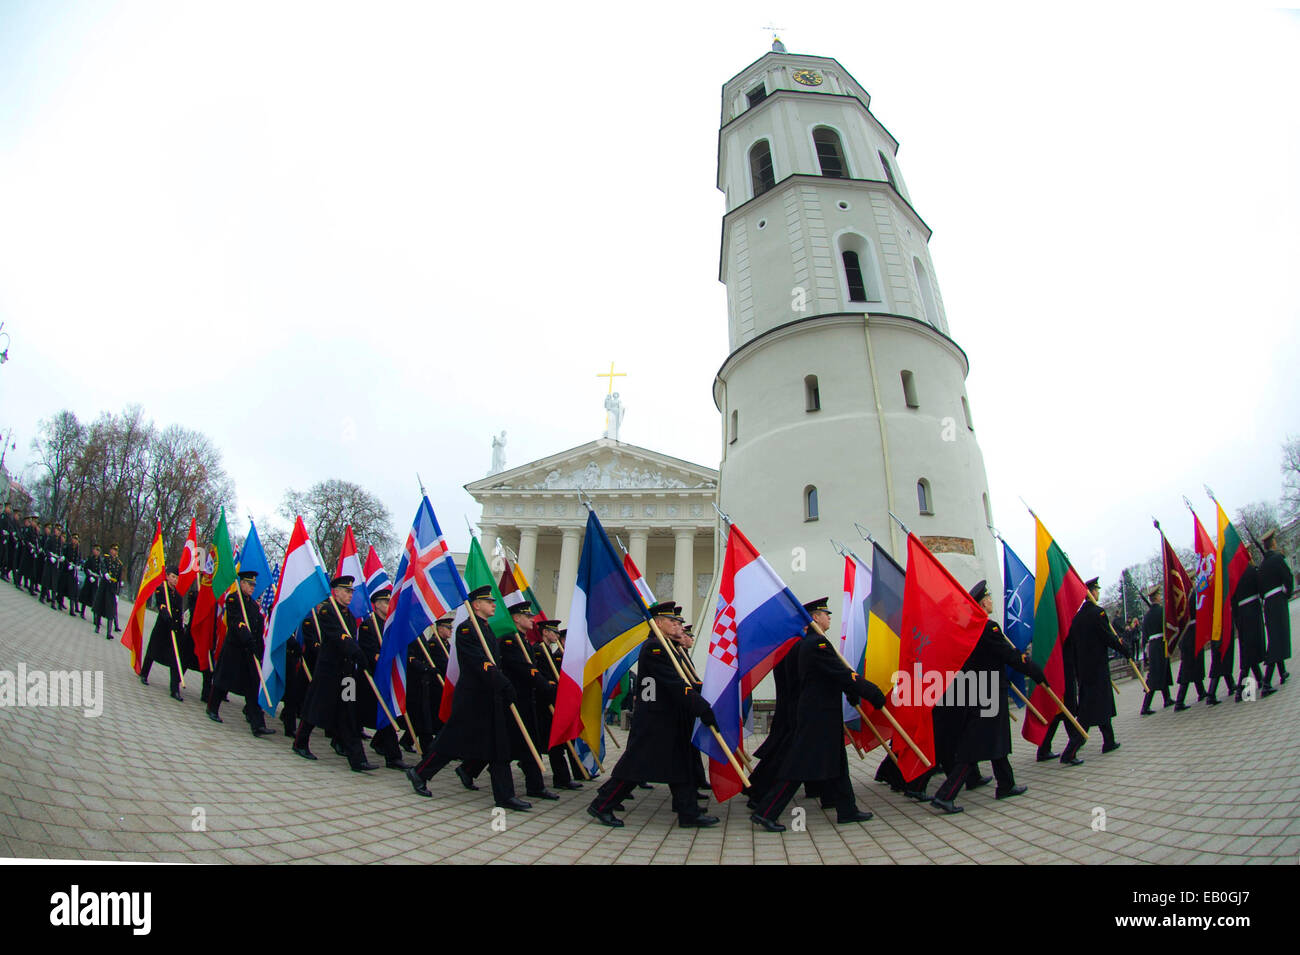 Vilnius, Lithuania. 23rd Nov, 2014. Guard of honor carry the flags of NATO member countries on the celebration in Vilnius, Lithuania, on Nov. 23, 2014. Lithuanian armed forces and troops of some NATO member countries held a gala with formation on Sunday to celebrate the Armed Forces Day. Lithuania's first decree on establishing armed forces was approved on Nov. 23, 1918, which became the Armed Forces Day of the Baltic country. © Alfredas Pliadis/Xinhua/Alamy Live News Stock Photo